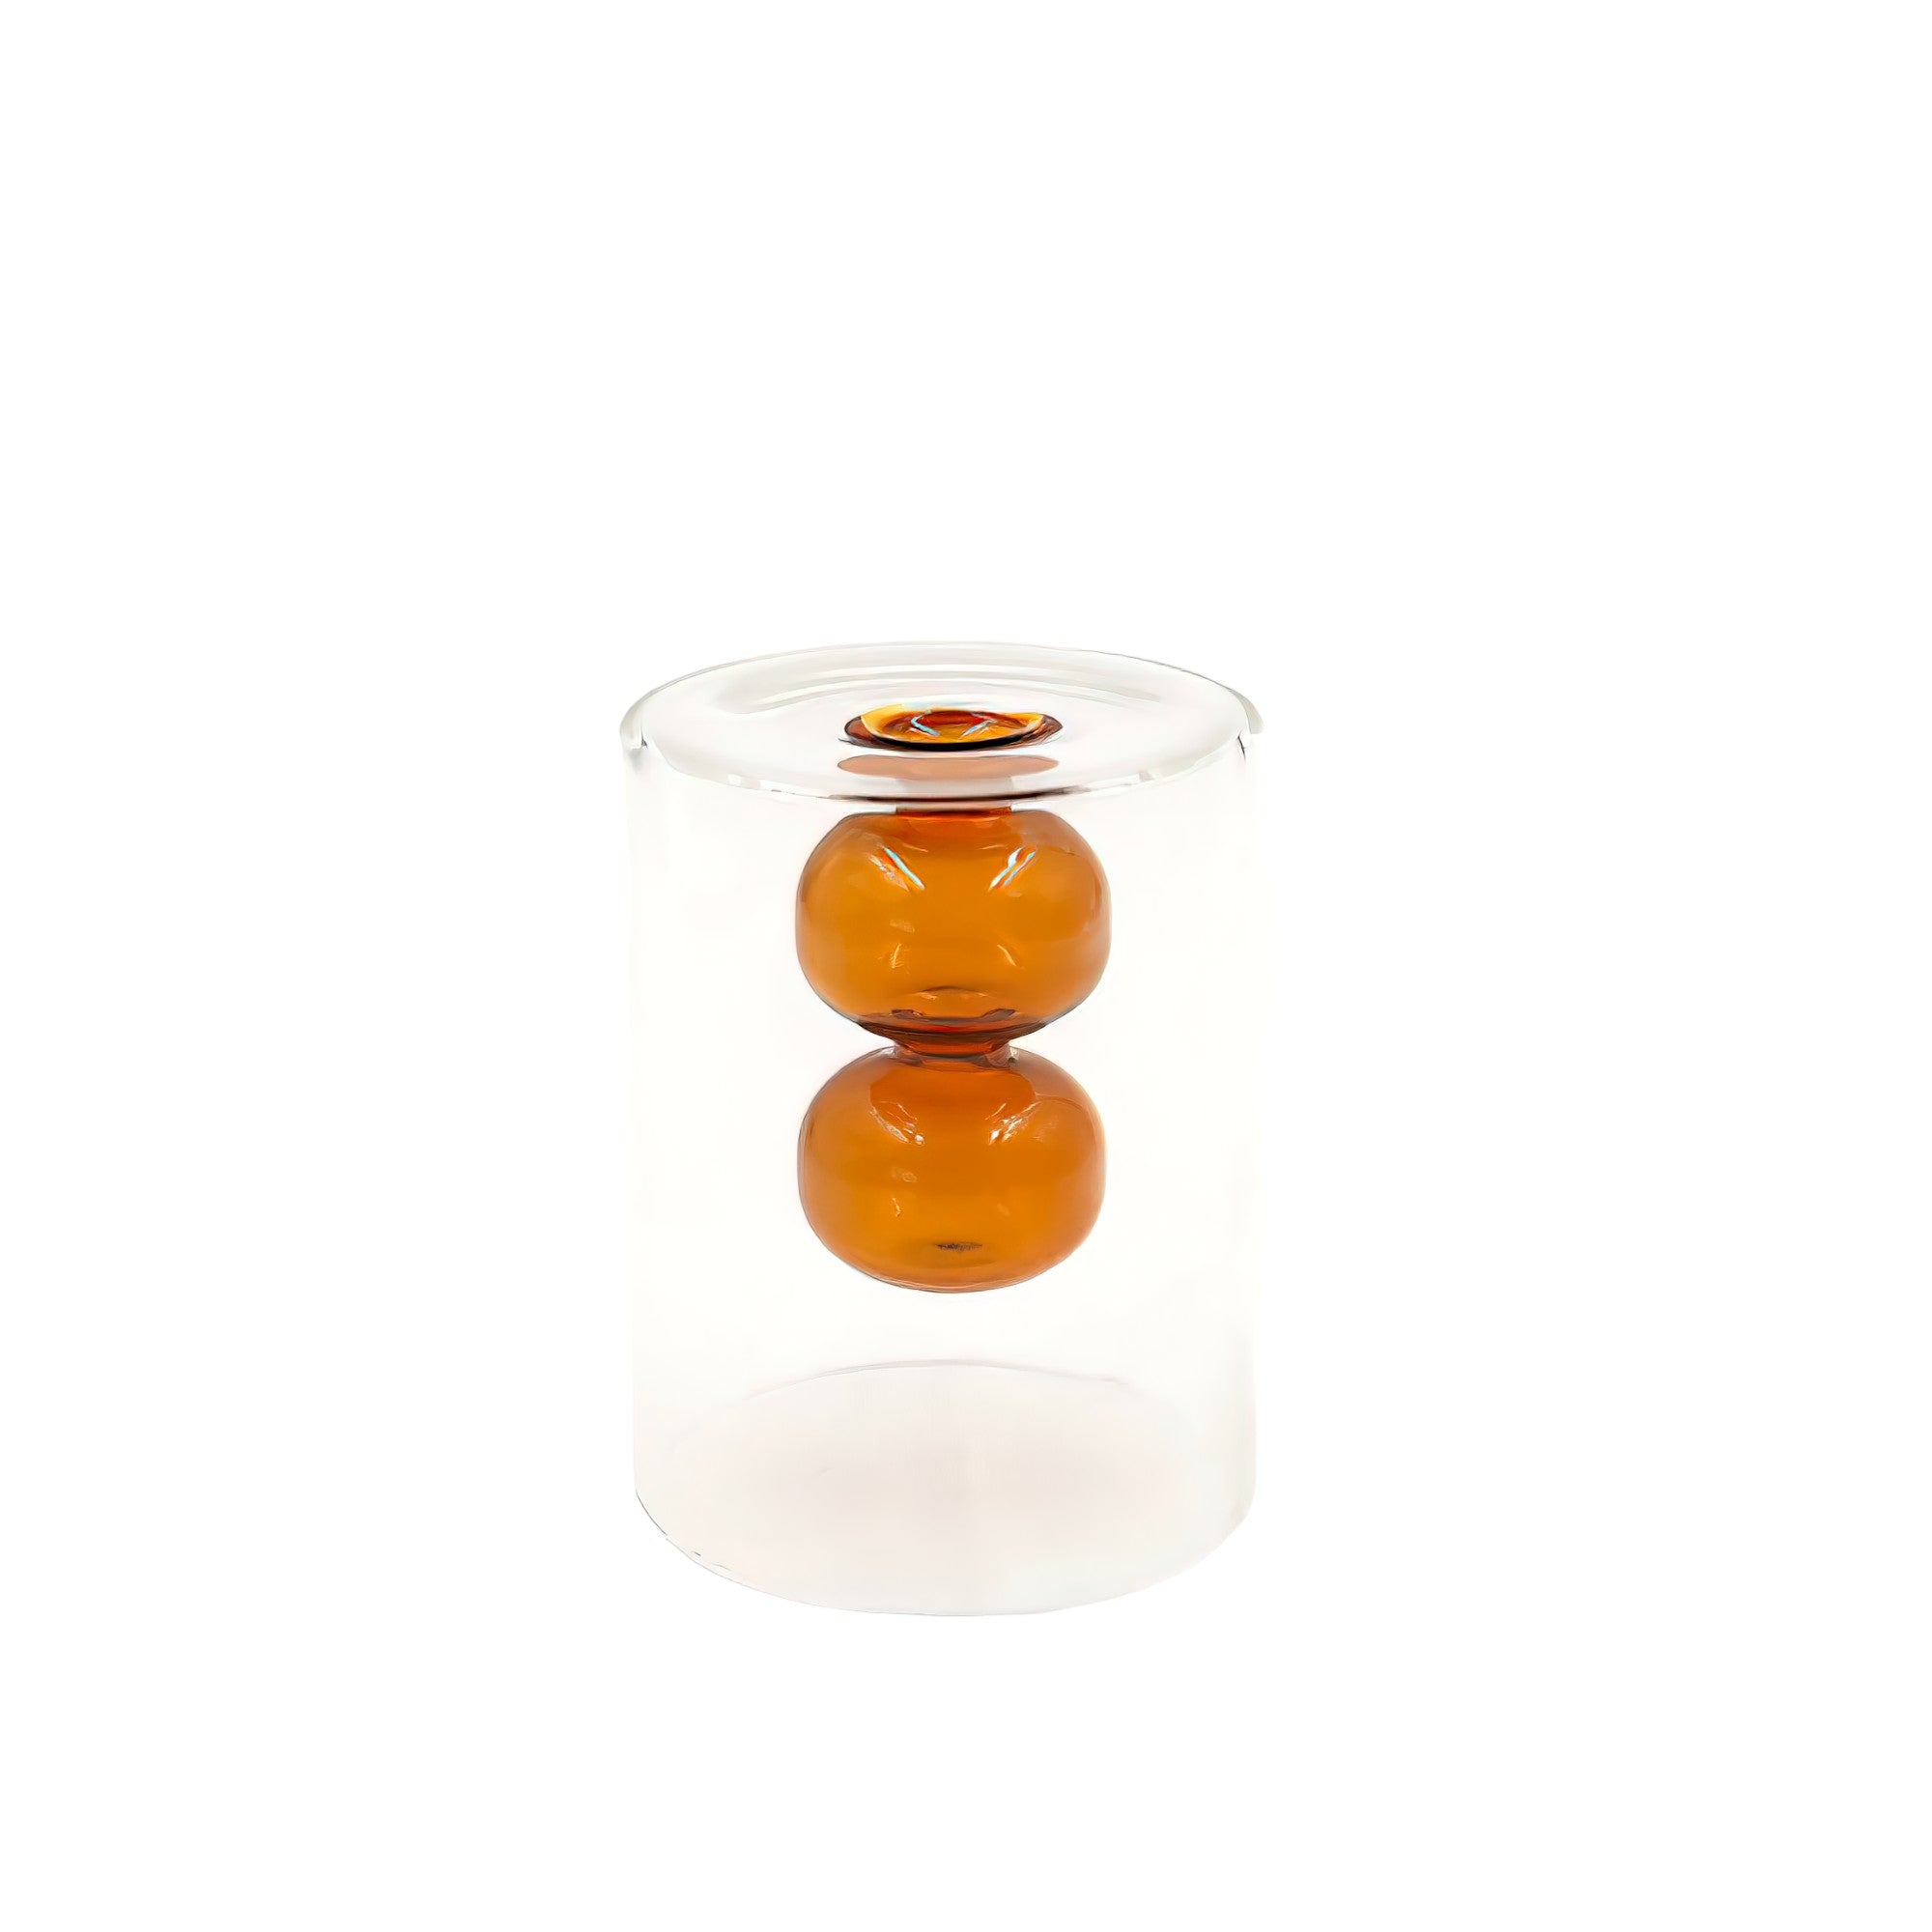 Whispering Hues Glass Vase Collection: Serenity in Every Curve